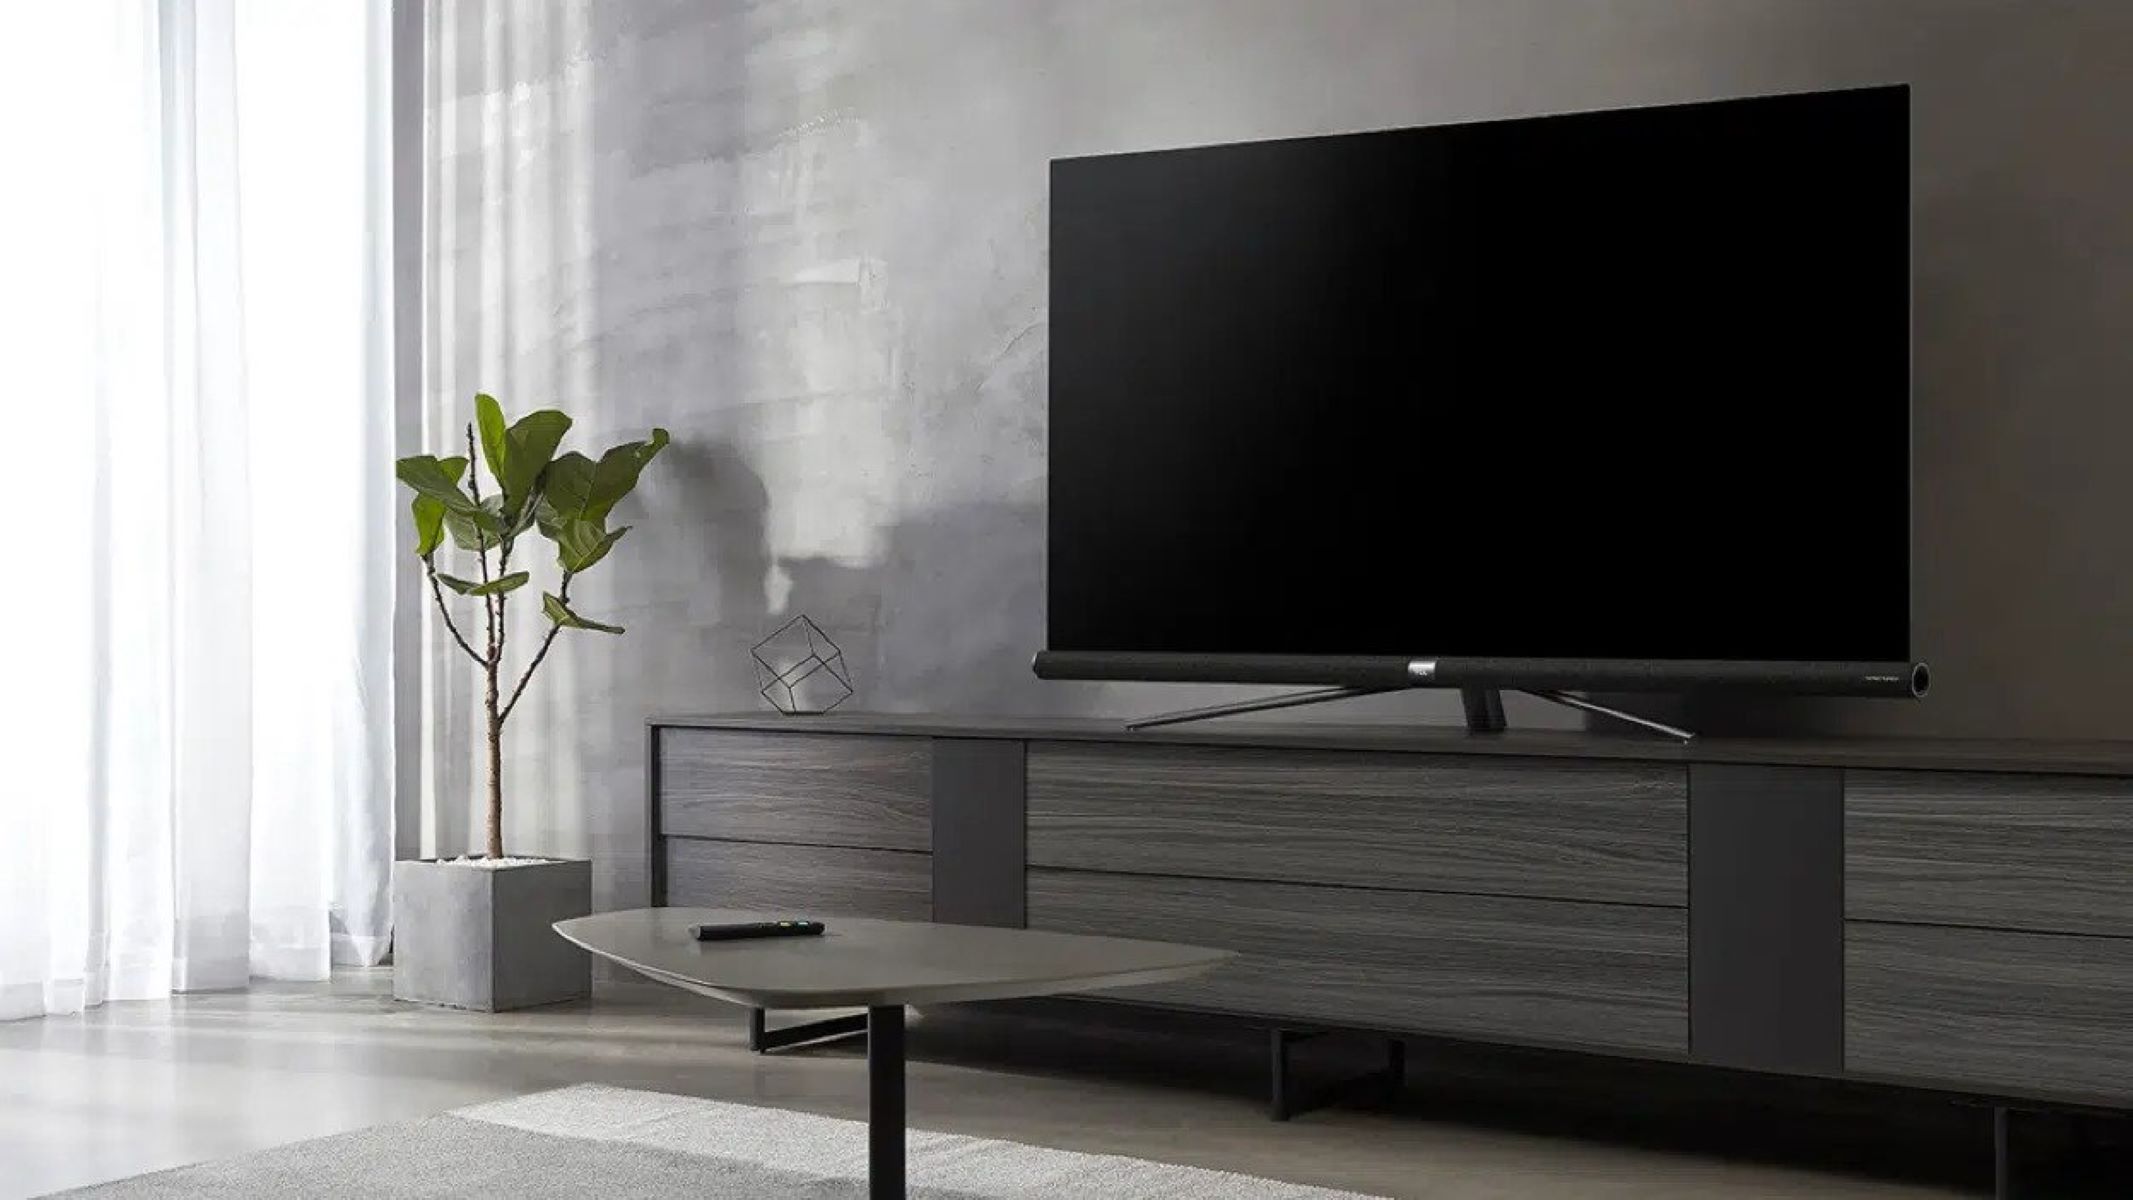 What Does TCL TV Stand For